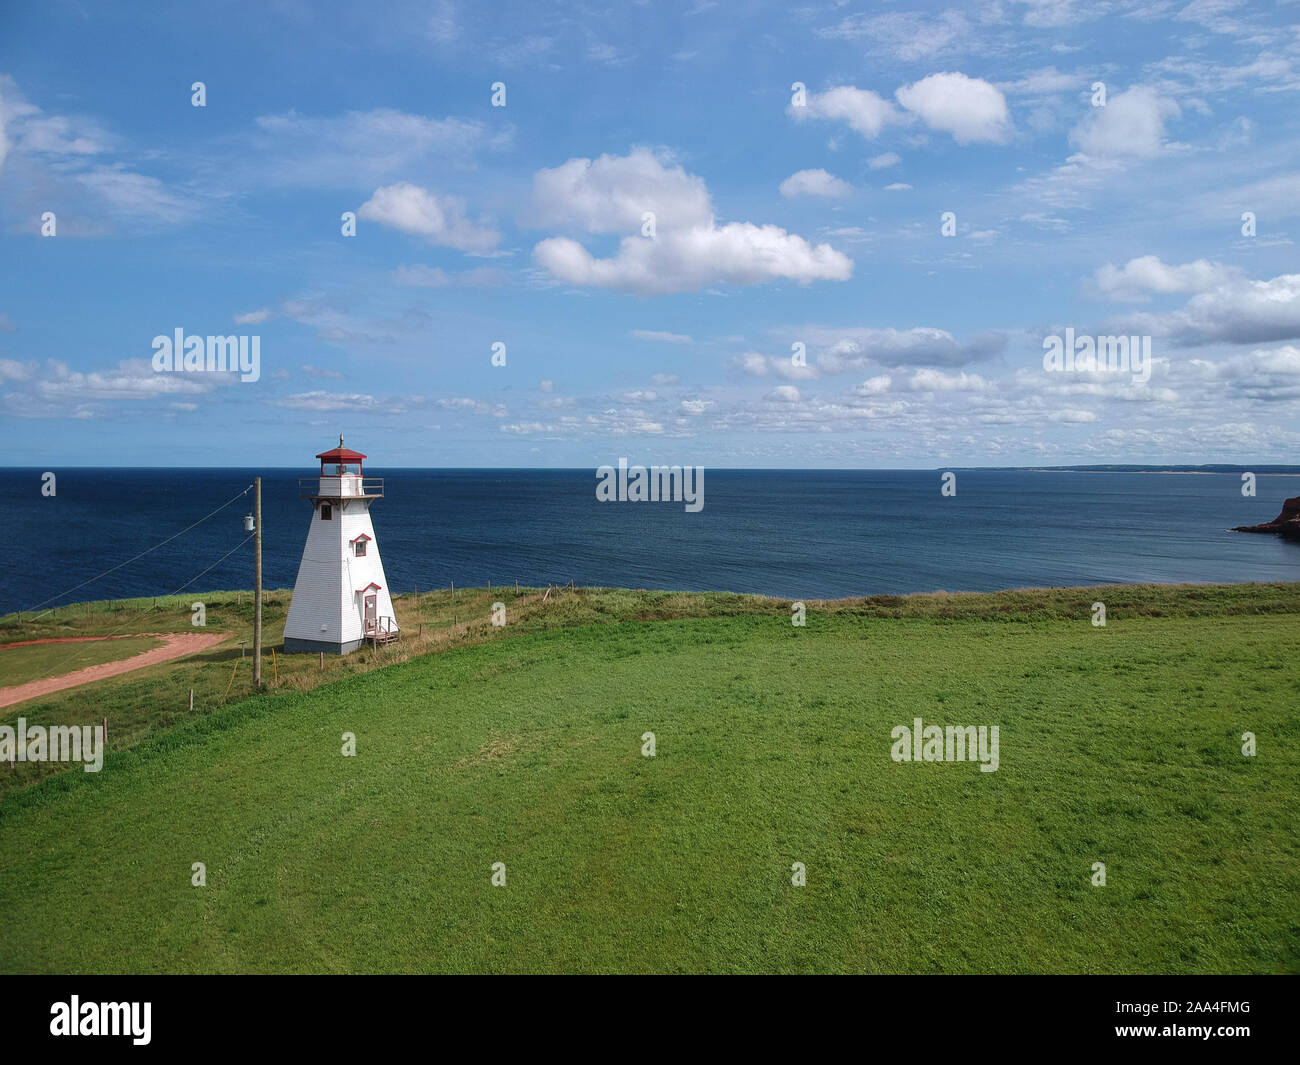 Aerial view of Cape Tryon Lighthouse and Coastal Landscape, Prince Edward Island, Maritime, Eastern Canada Stock Photo